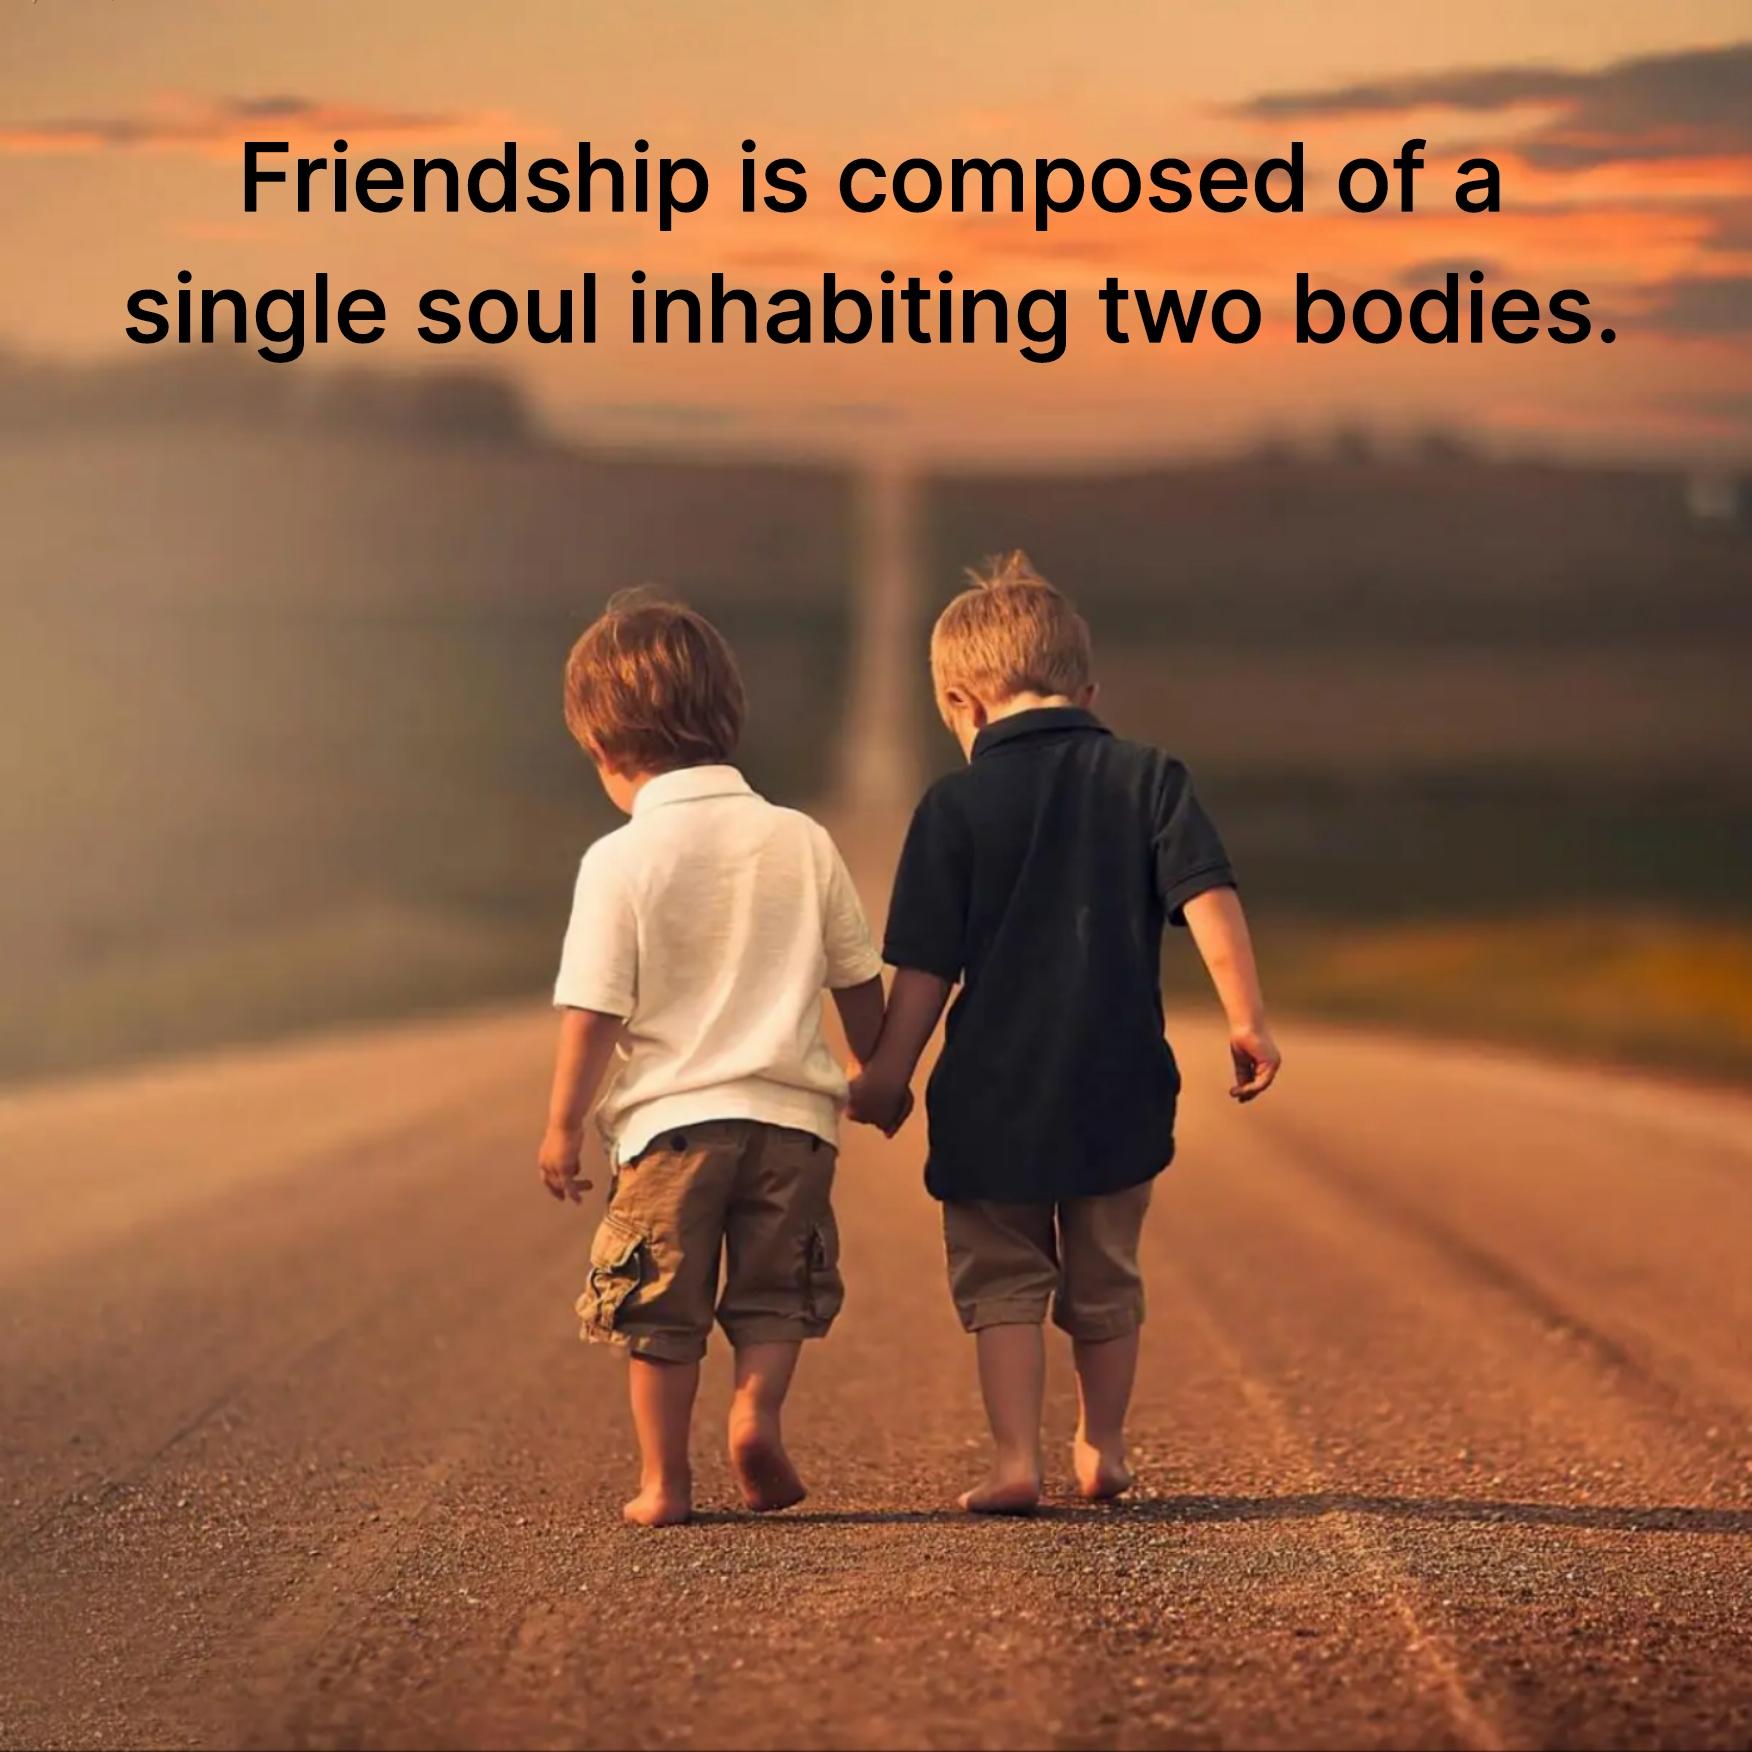 Friendship is composed of a single soul inhabiting two bodies